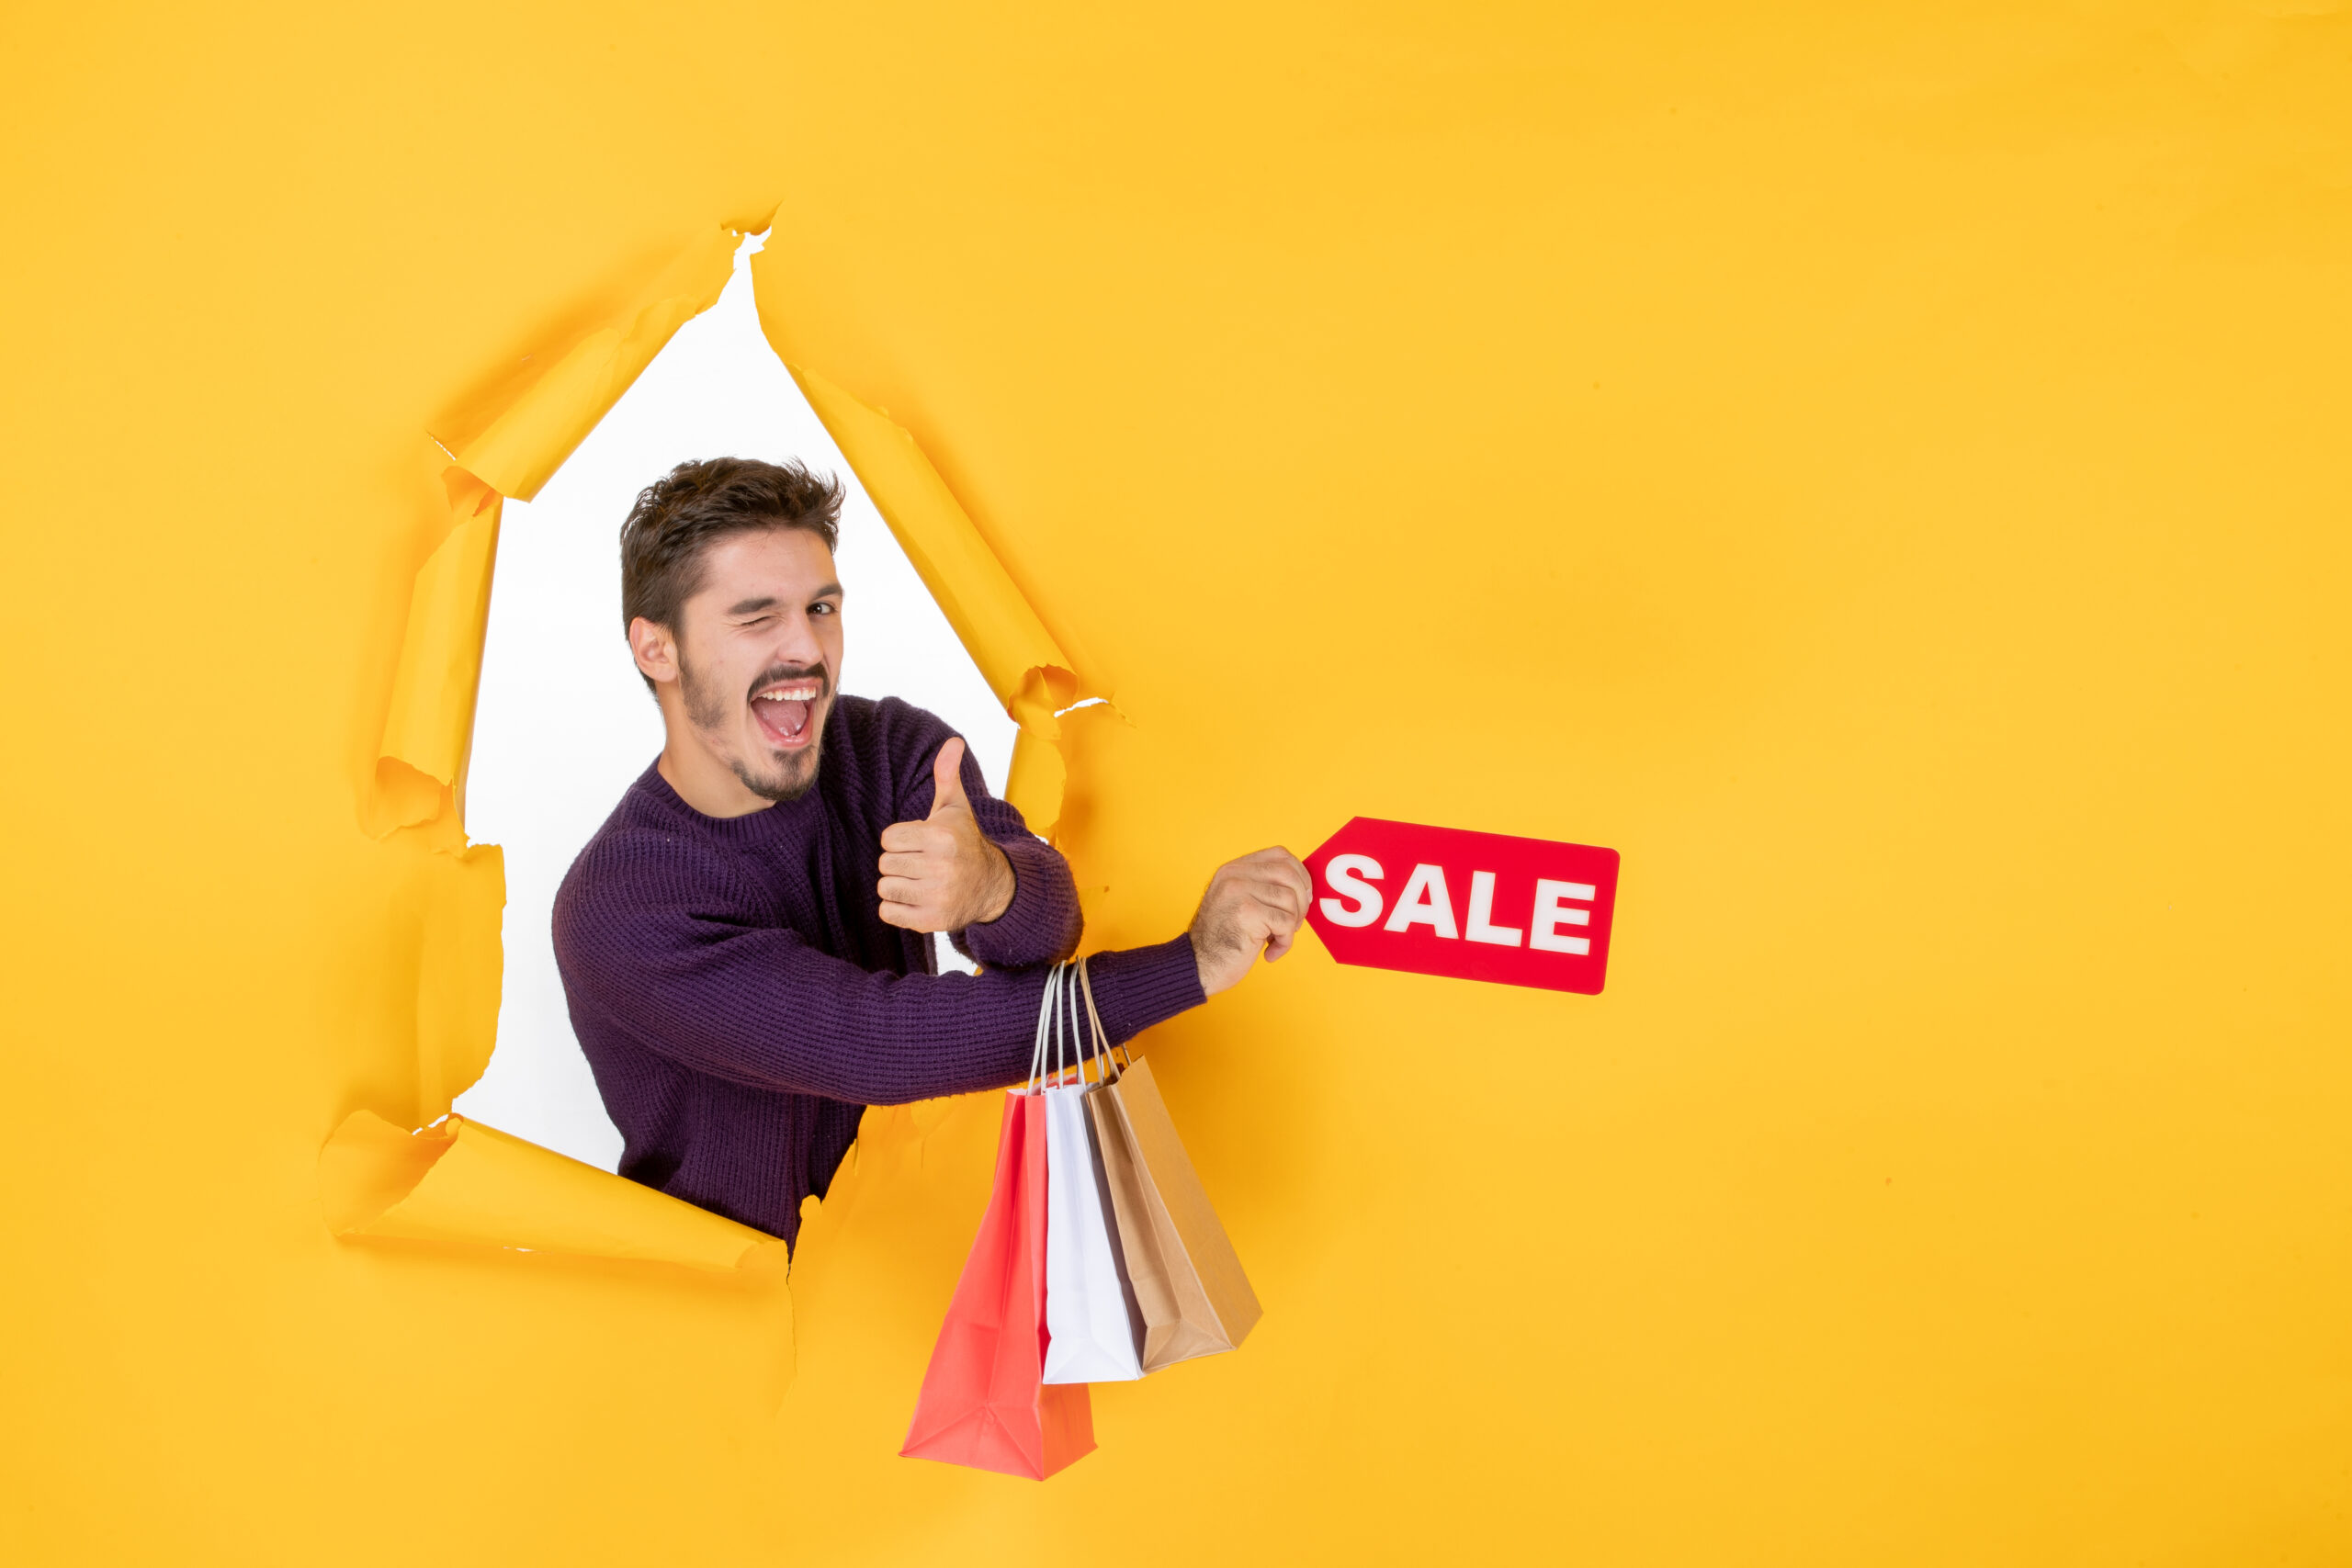 Image of a man displaying a Sales sign or promoting a sales promotion